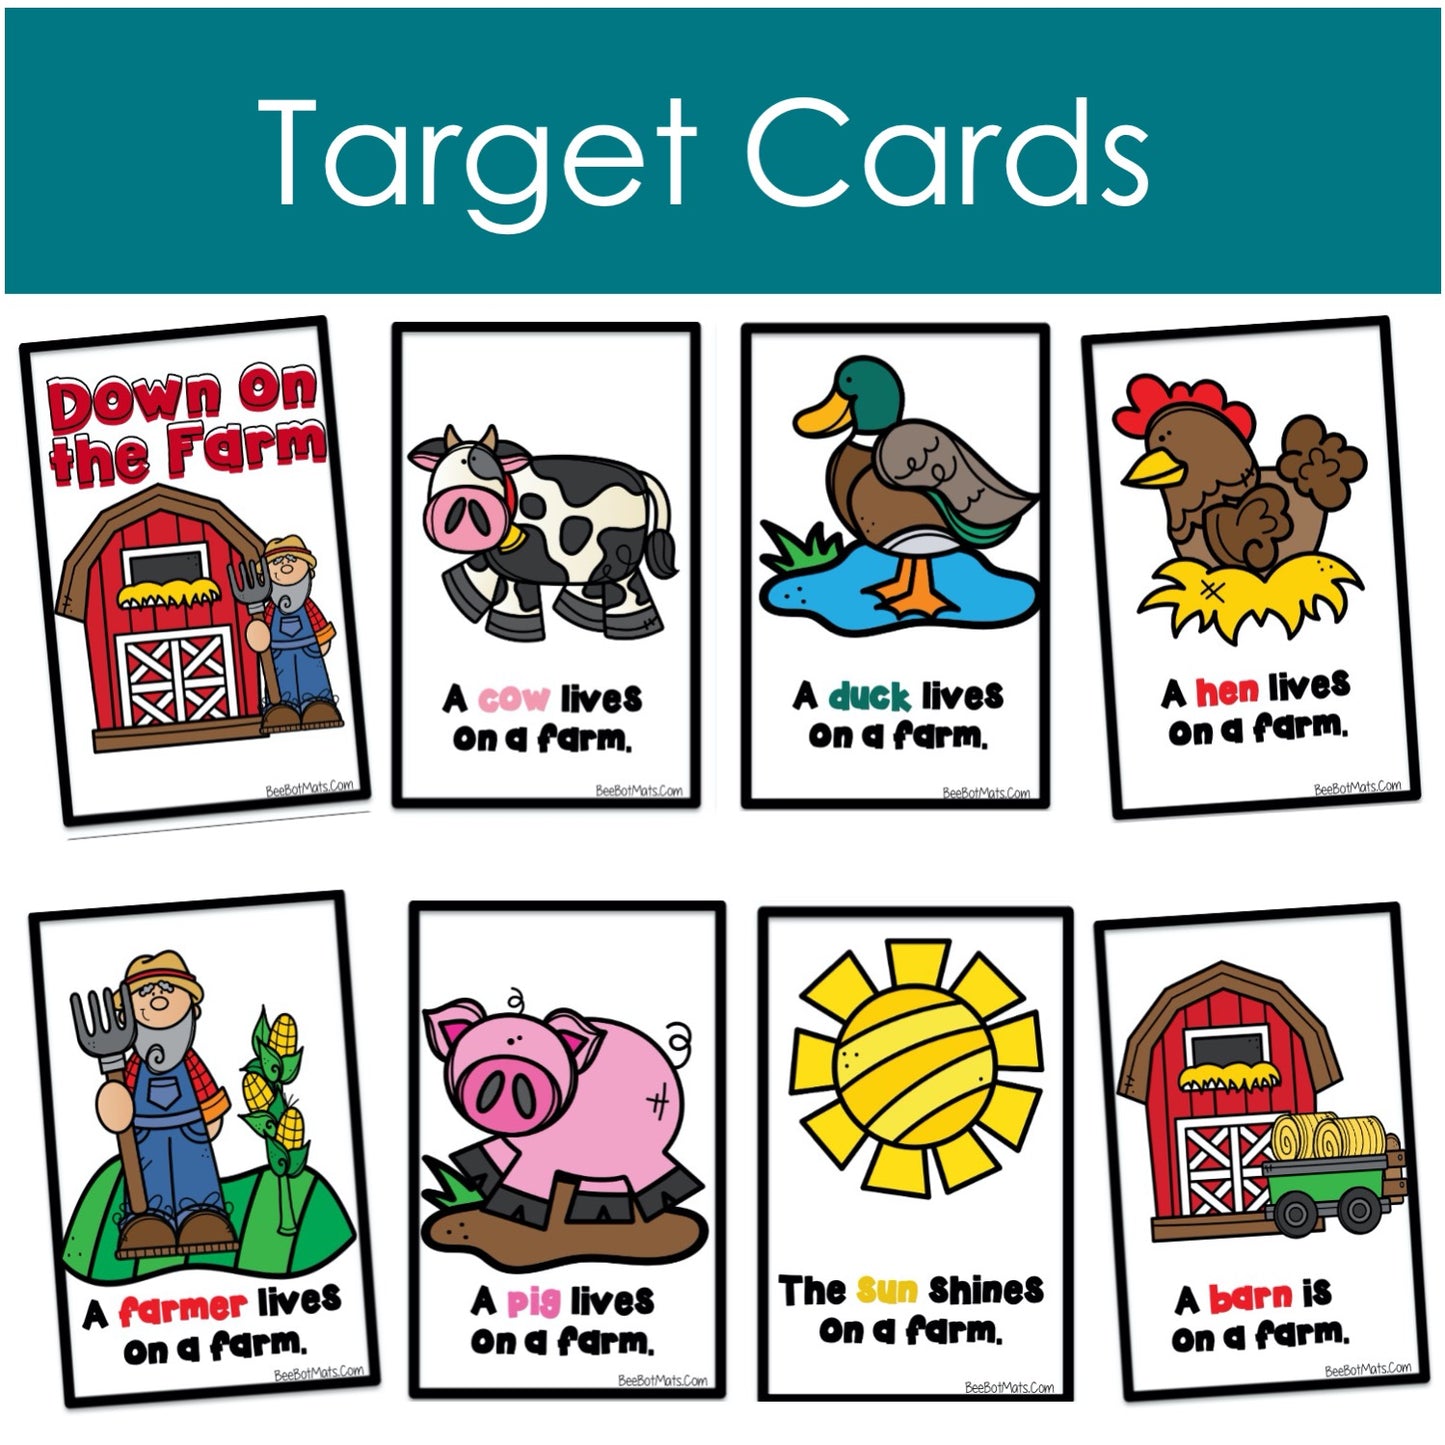 BeeBot Down on the farm target cards